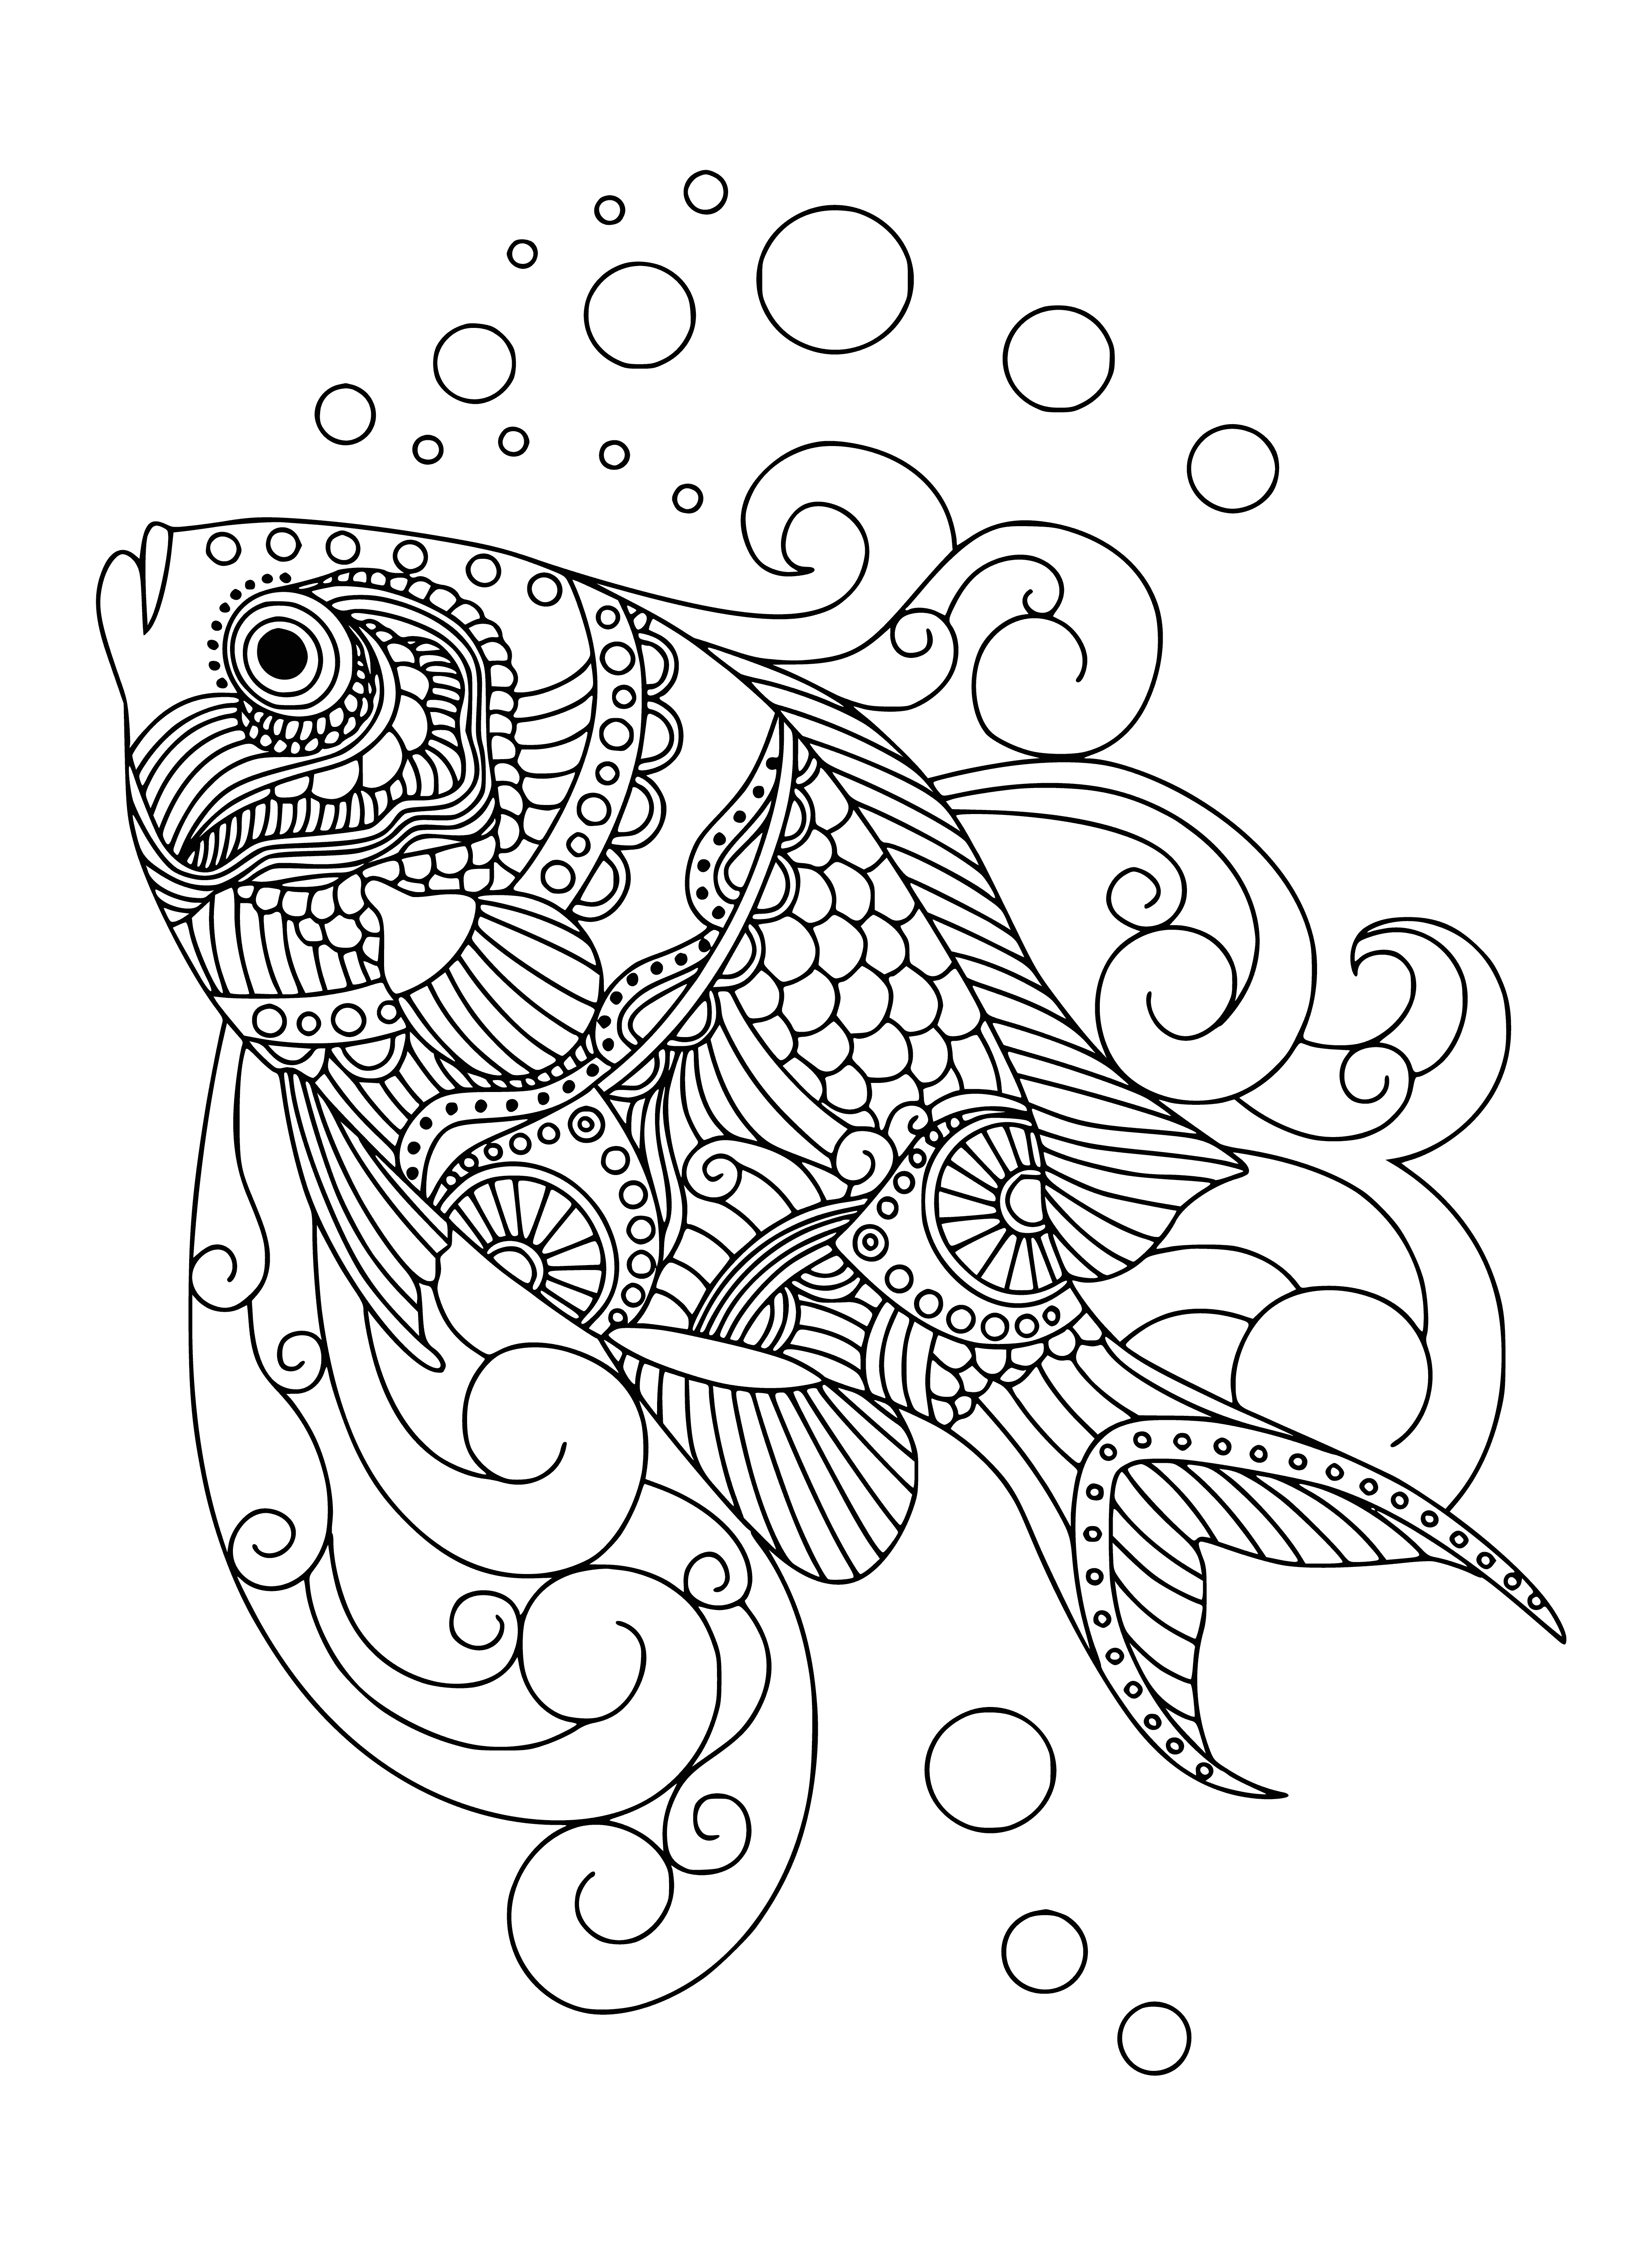 Small fish coloring page